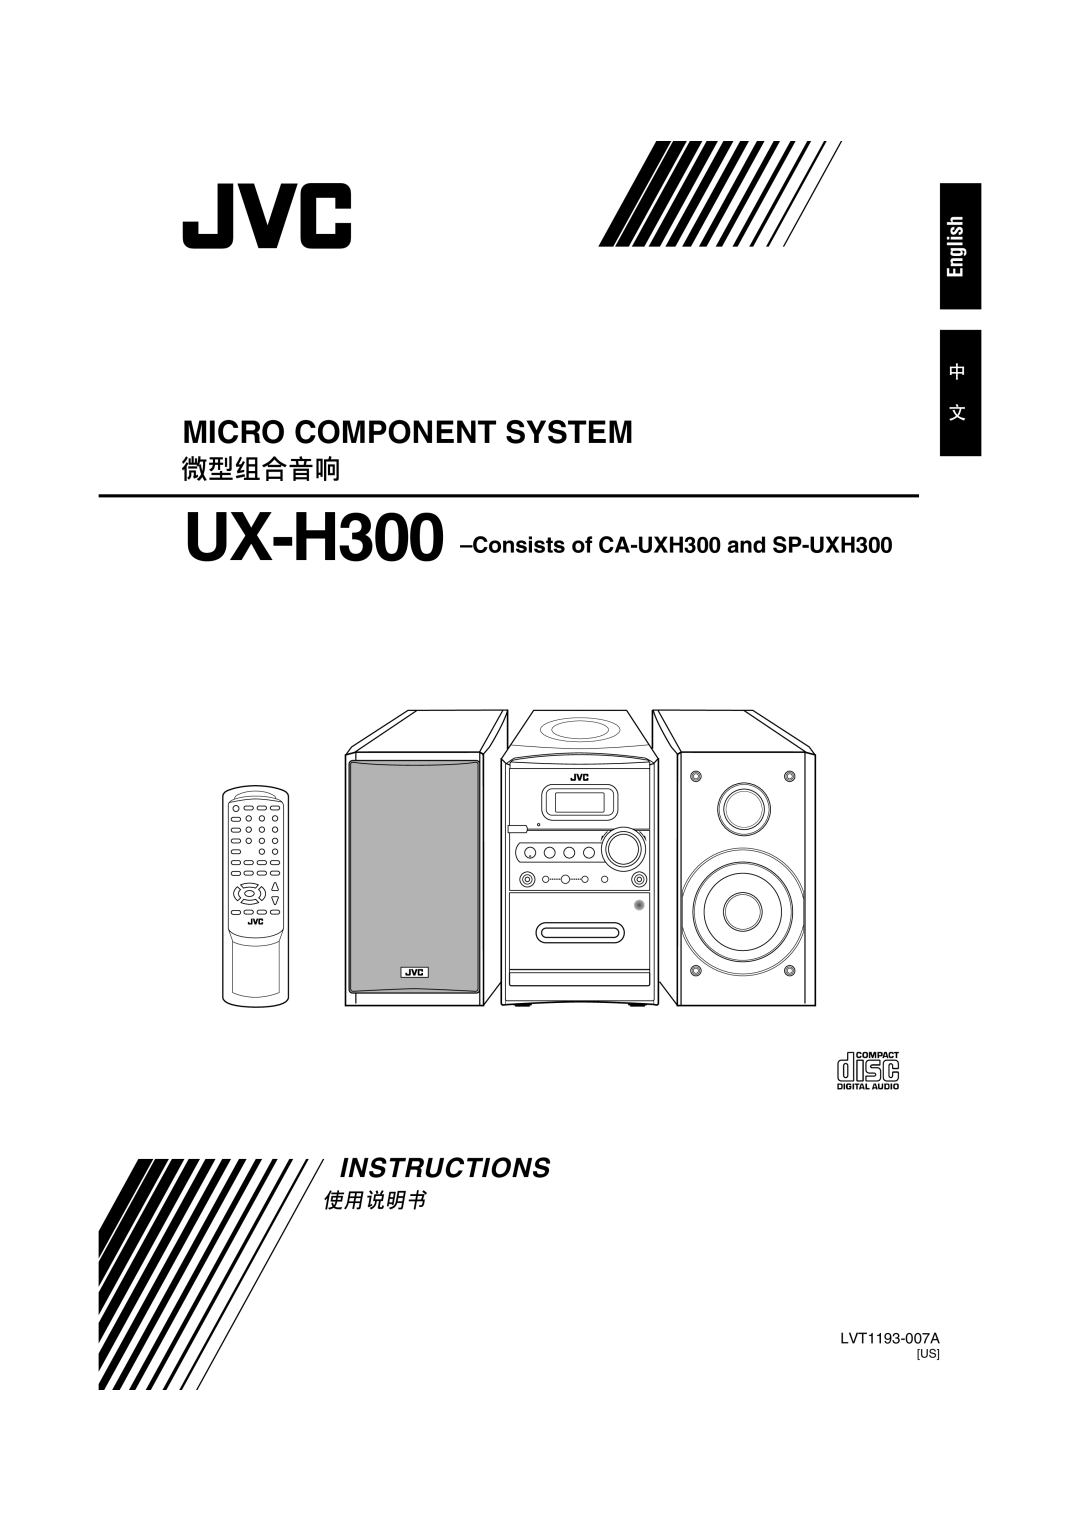 JVC manual Micro Component System, Instructions, UX-H300 –Consistsof CA-UXH300and SP-UXH300, English, LVT1193-007A 